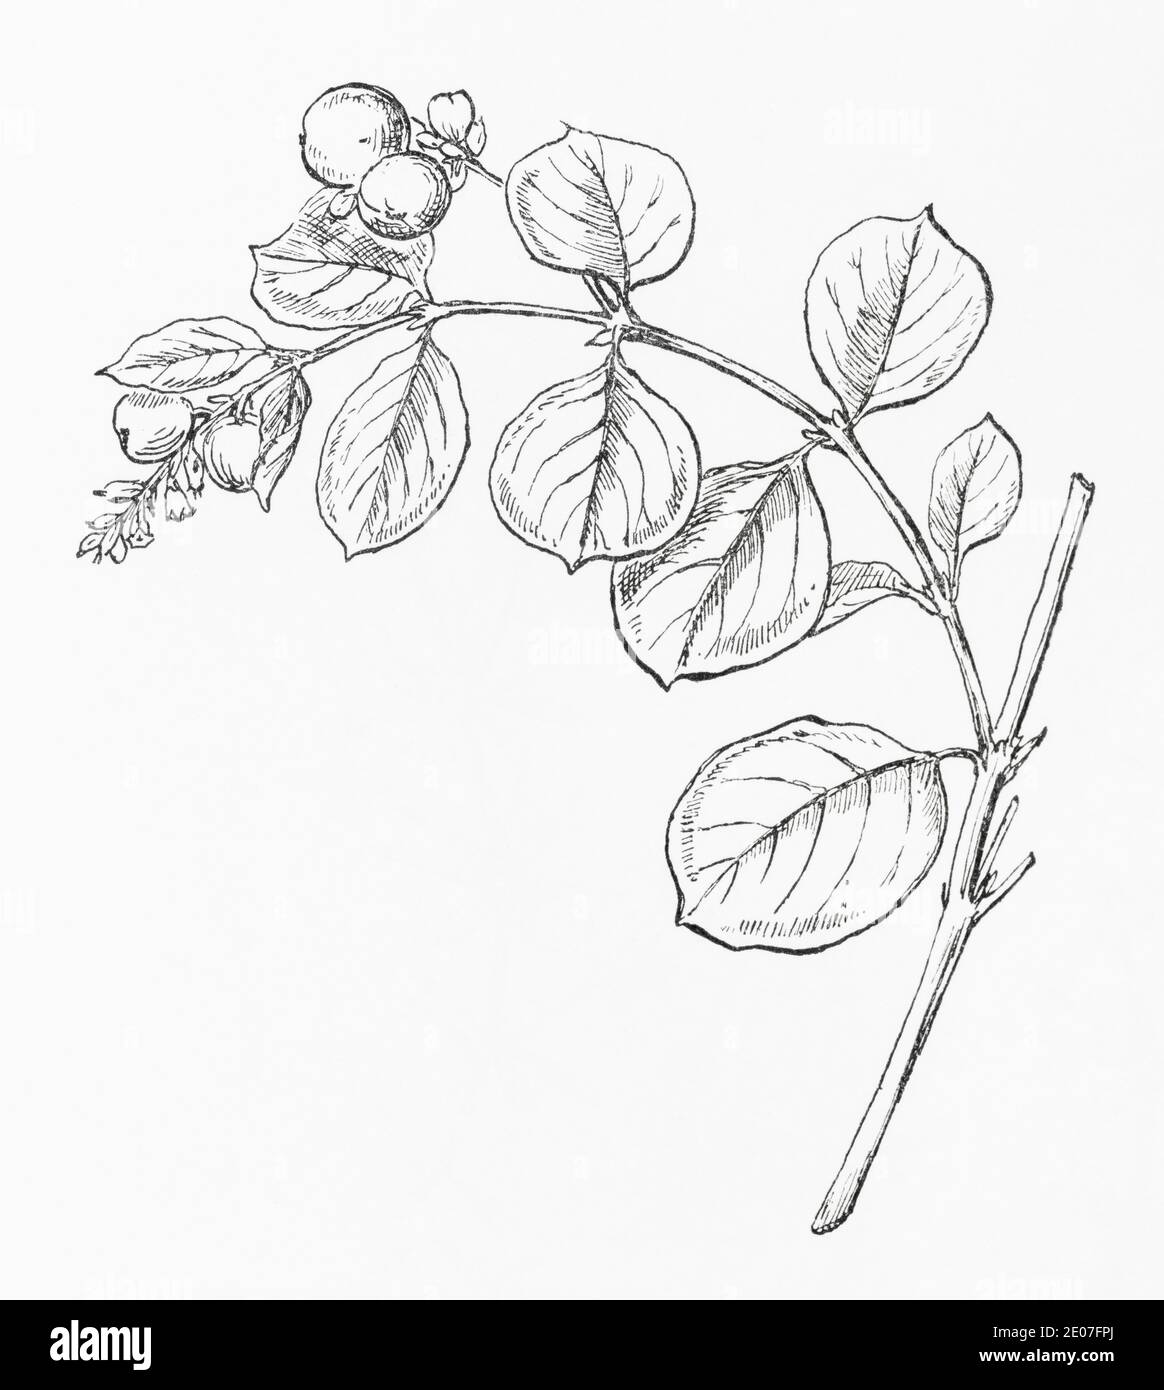 Old botanical illustration engraving of Snowberry / Symphoricarpos racemosus. Sometimes used as a medicinal herbal plant. See Notes Stock Photo